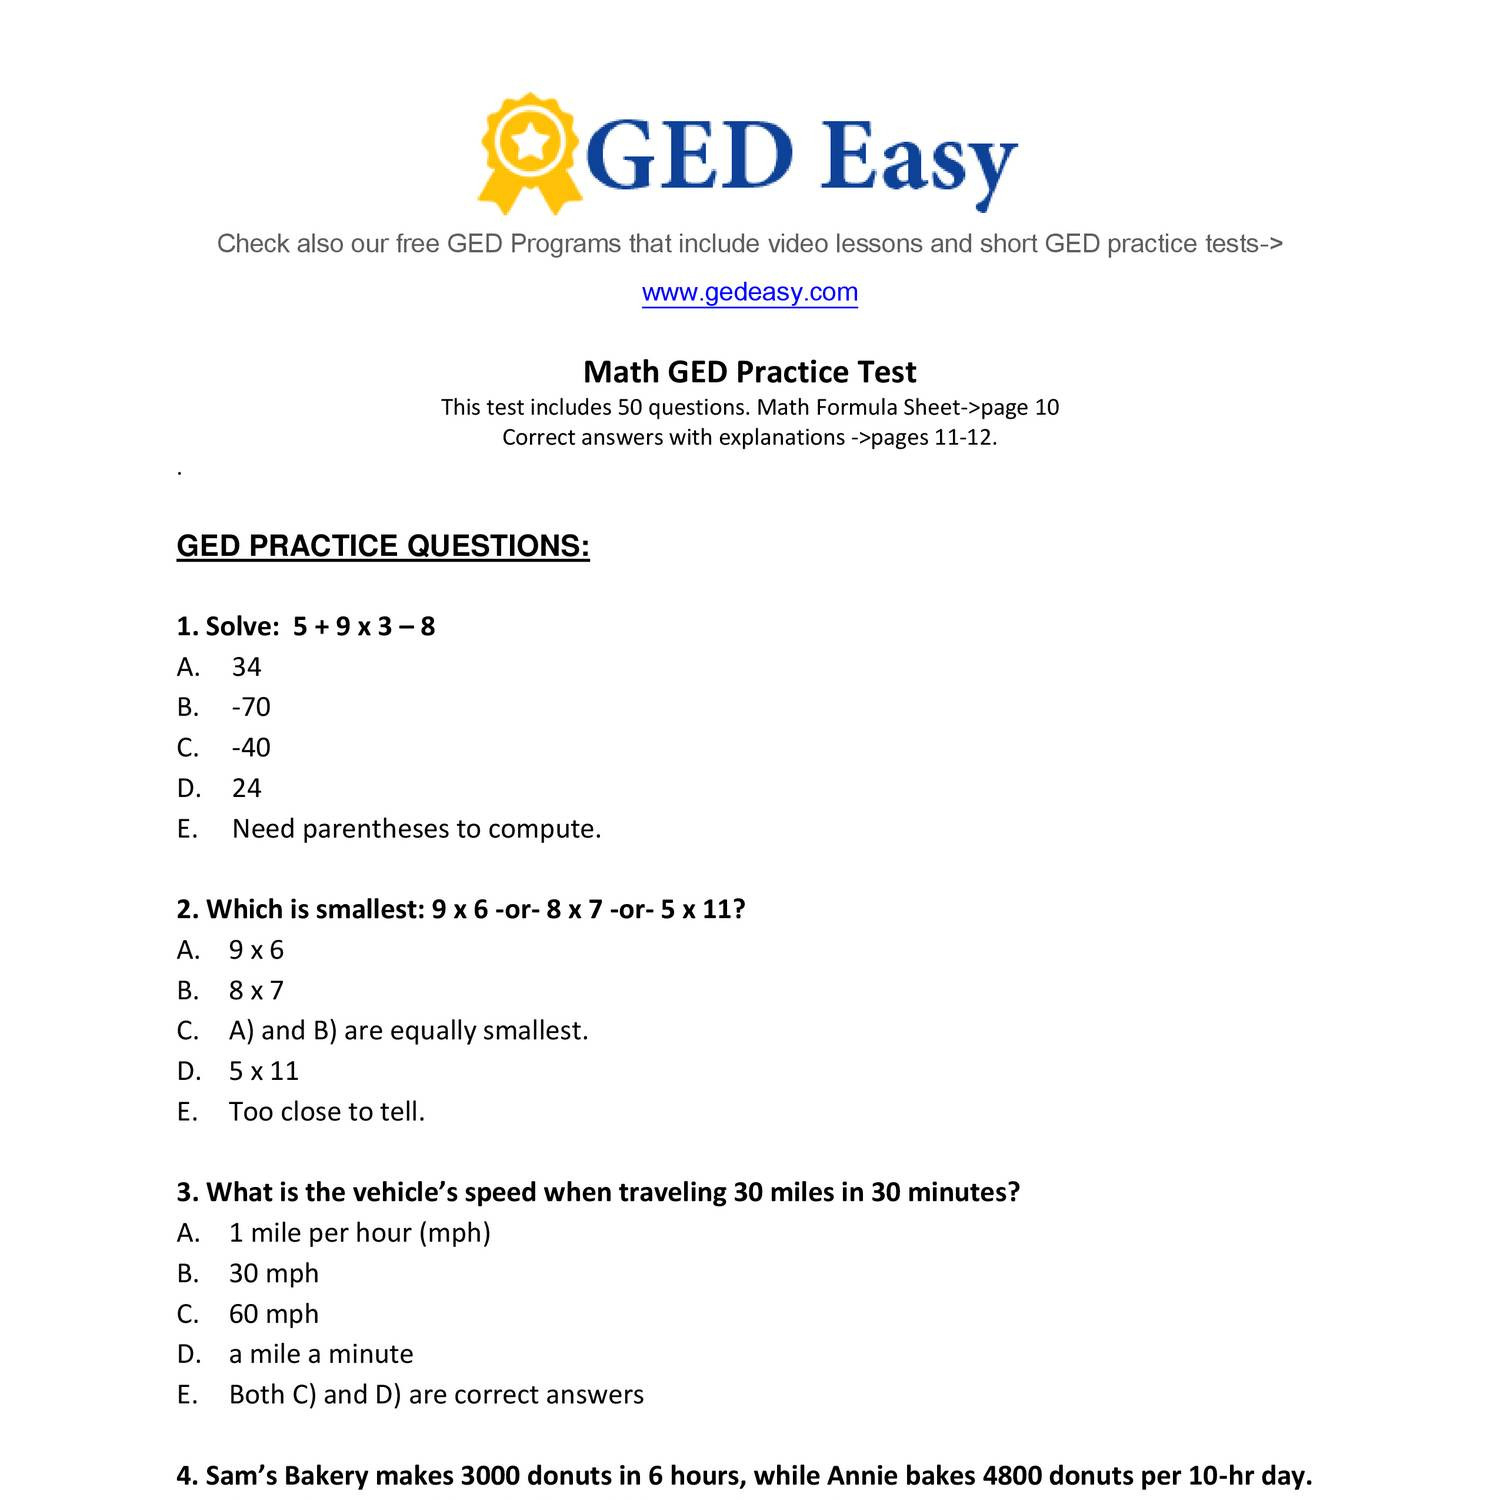 free ged math practice questions